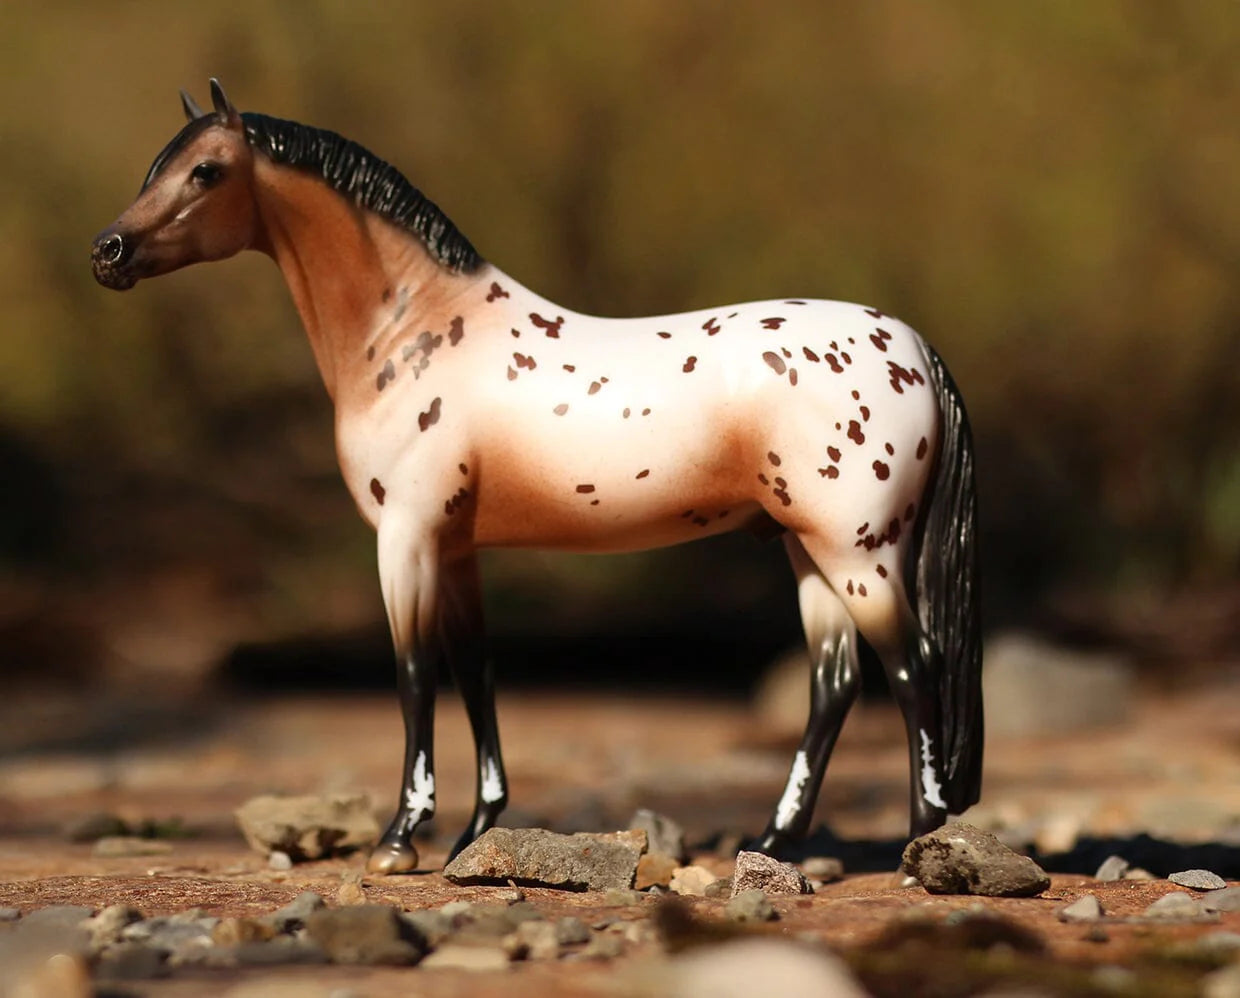 Breyer The Ideal Series | Pony of the Americas